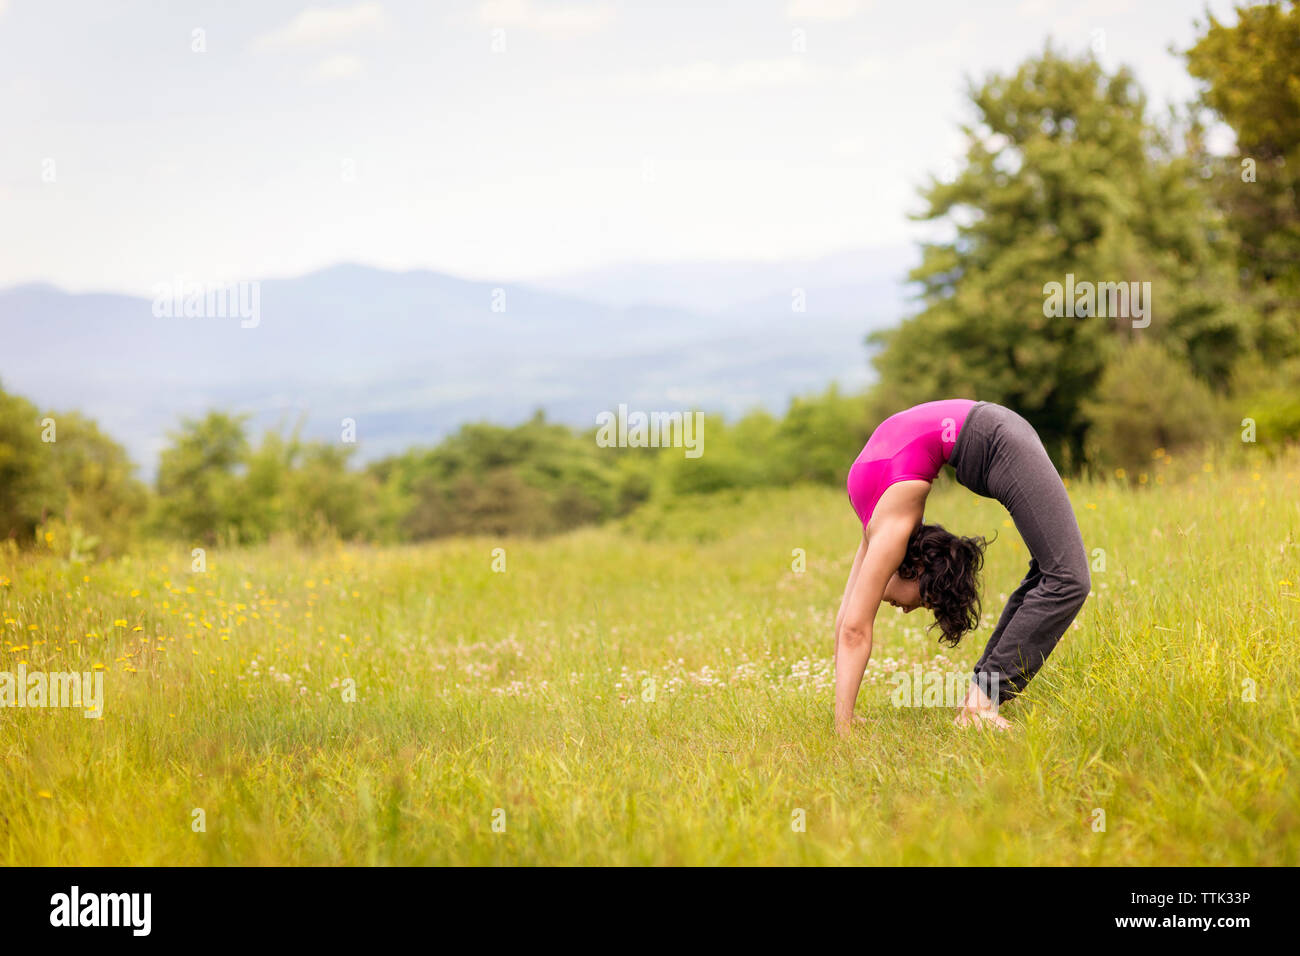 Side view of woman bending over backwards on grassy field Stock Photo